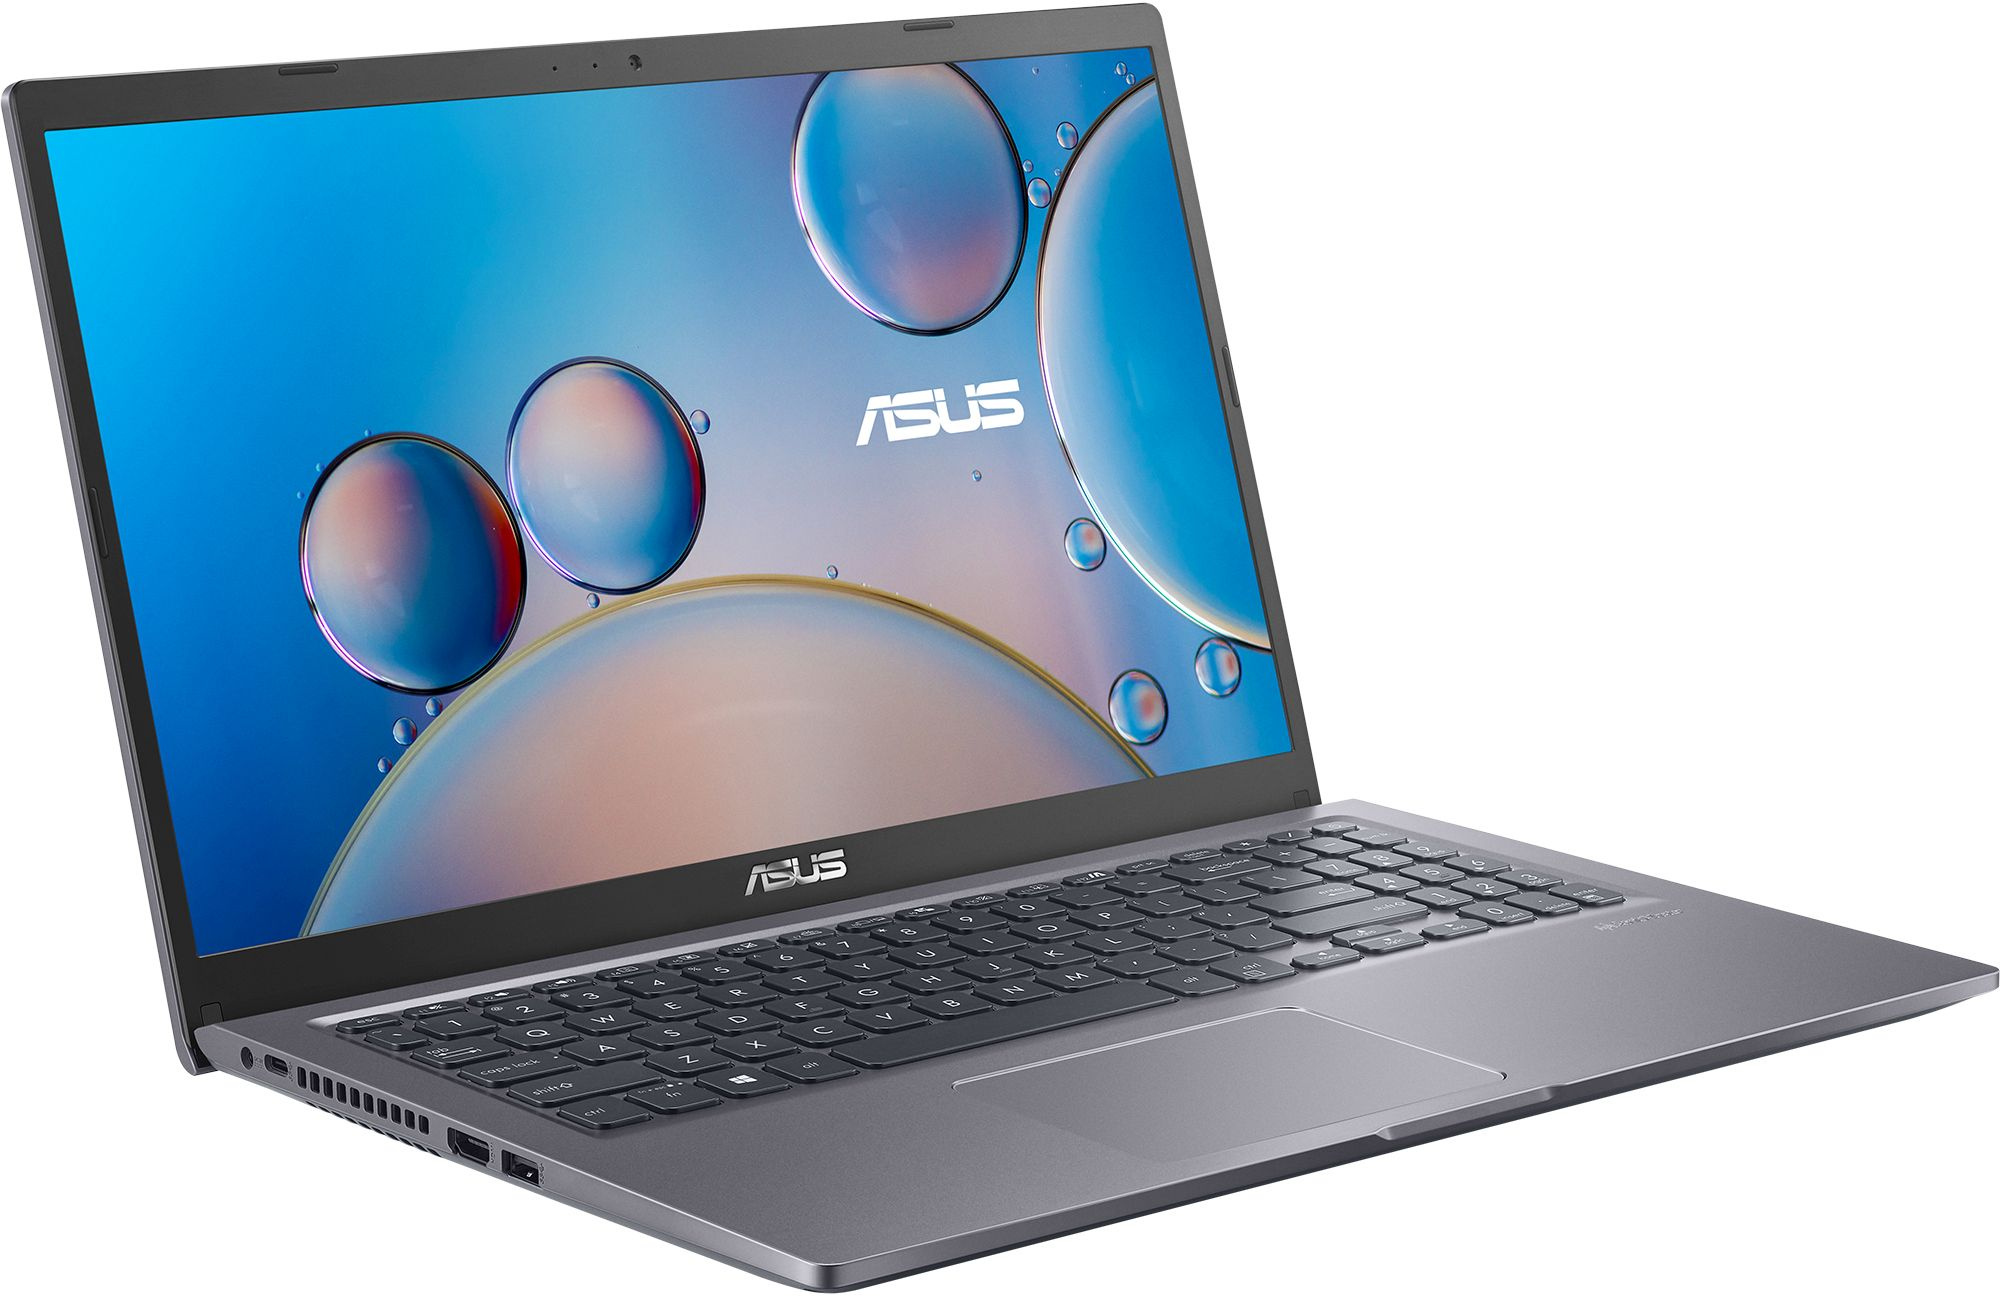 ASUS x515jf-br192t. Ноутбук ASUS r565ja-br594t. ASUS Laptop 15 x515jf-bq009t. Ноутбук ASUS m515da-br390.